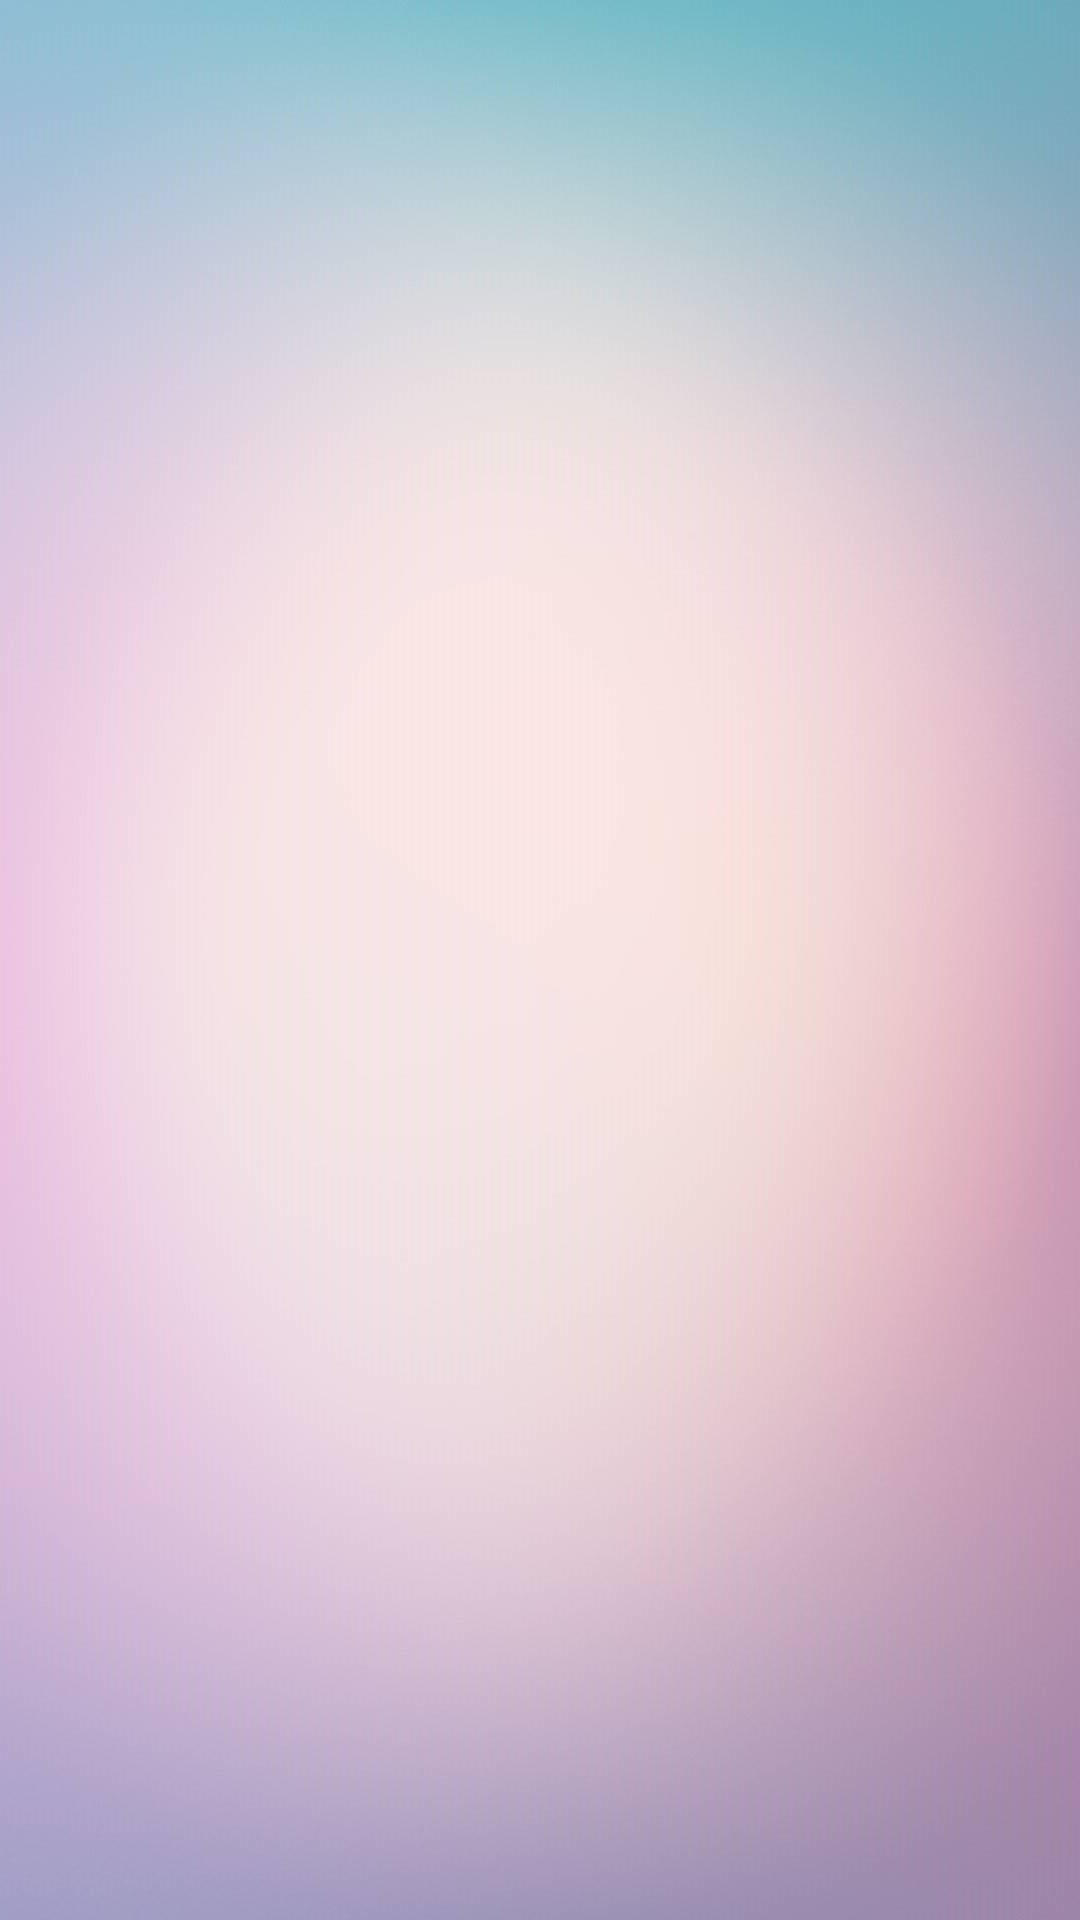 1080x1920 Download Calming Blurred Background 1080 x 1920 Wallpapers - 4388361 .